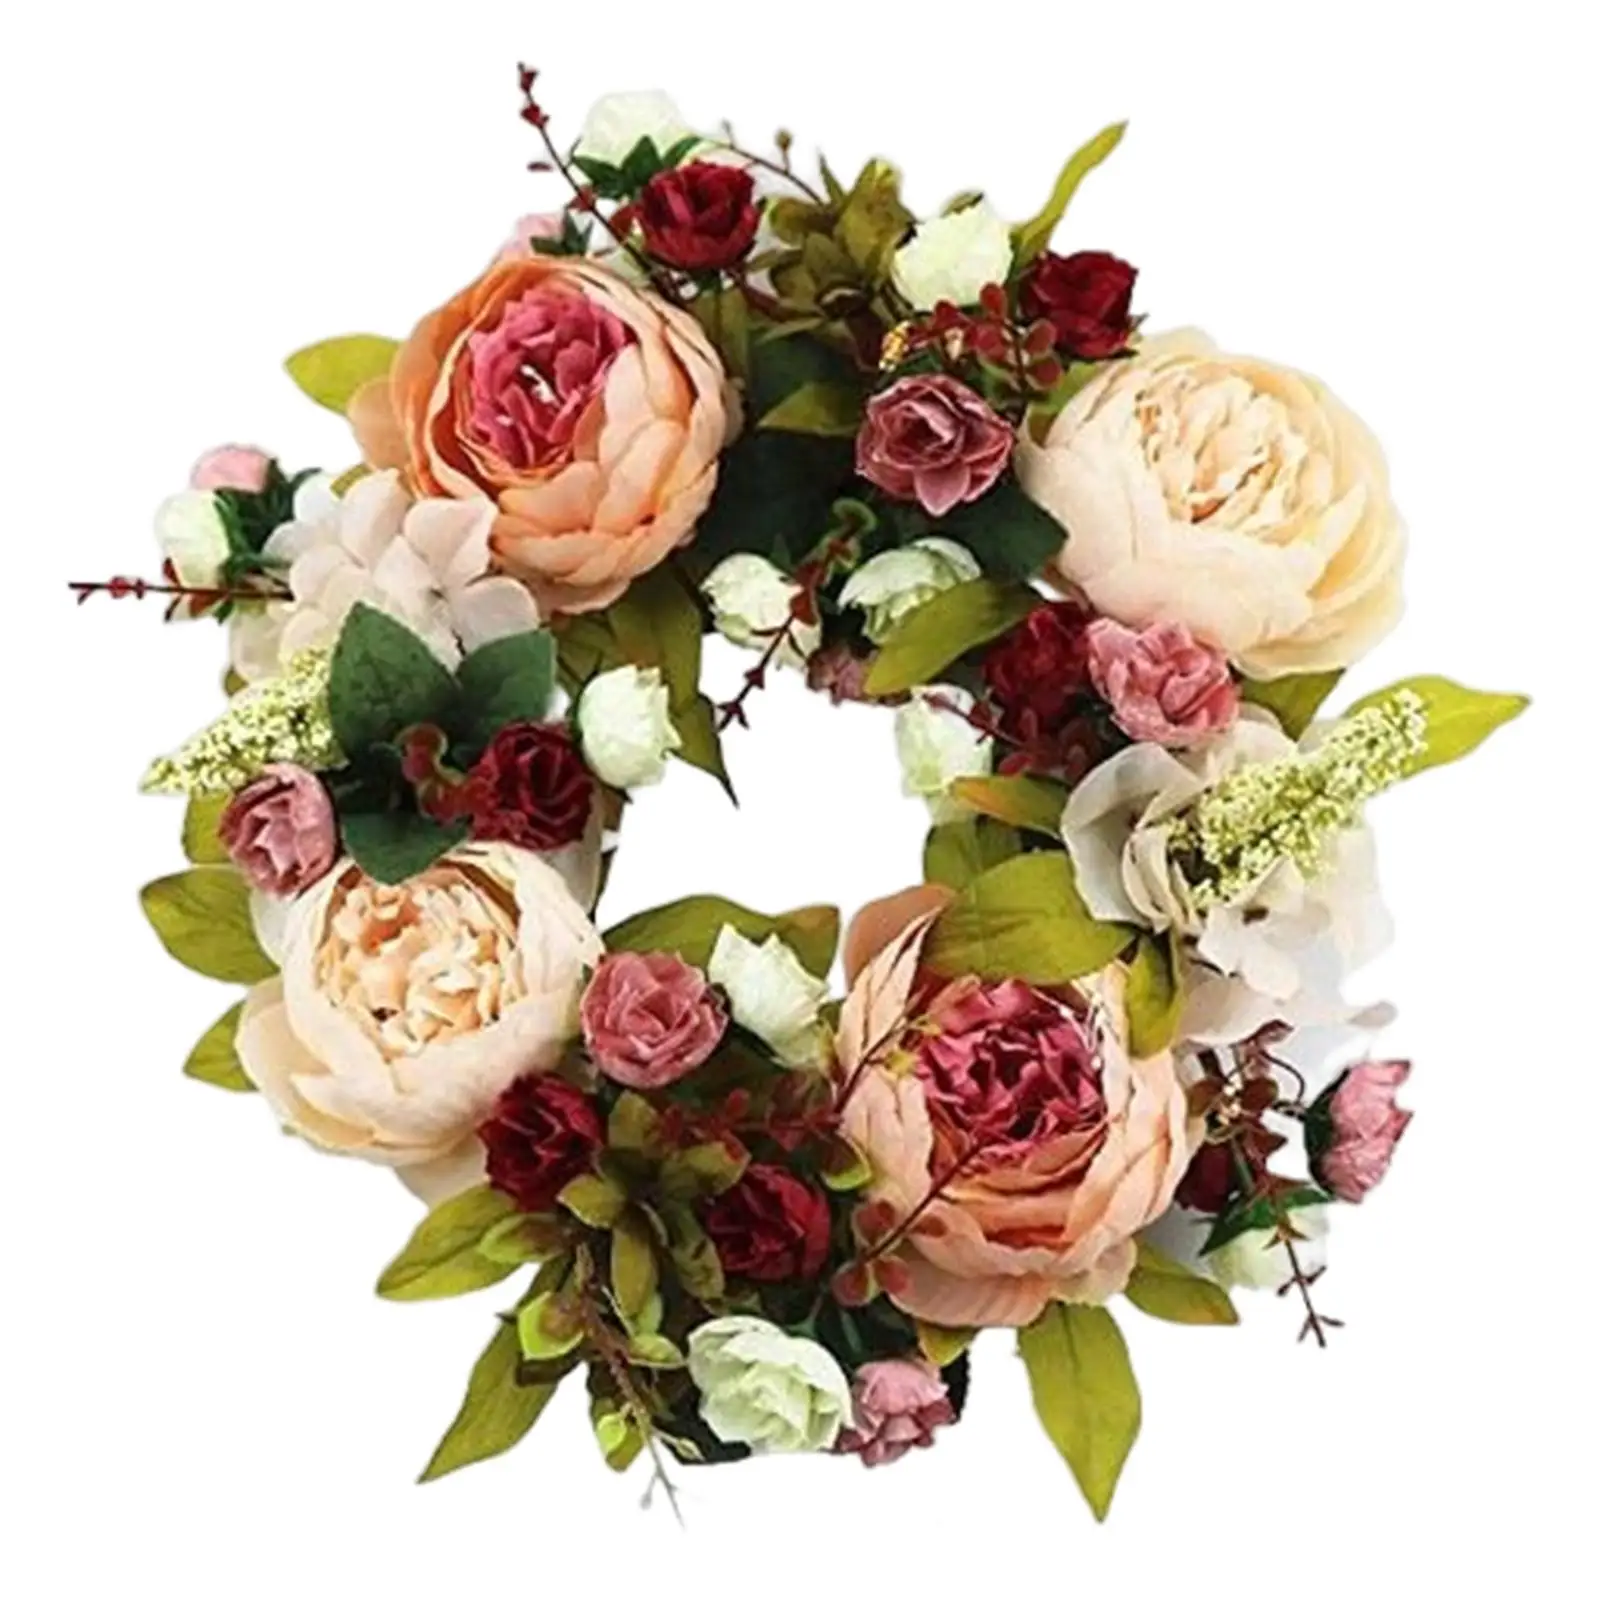 30cm Peony Flowers Artificial Wreath Faux Floral Wreath Spring Garland Handmade for Wedding Fistival indoor Decorative